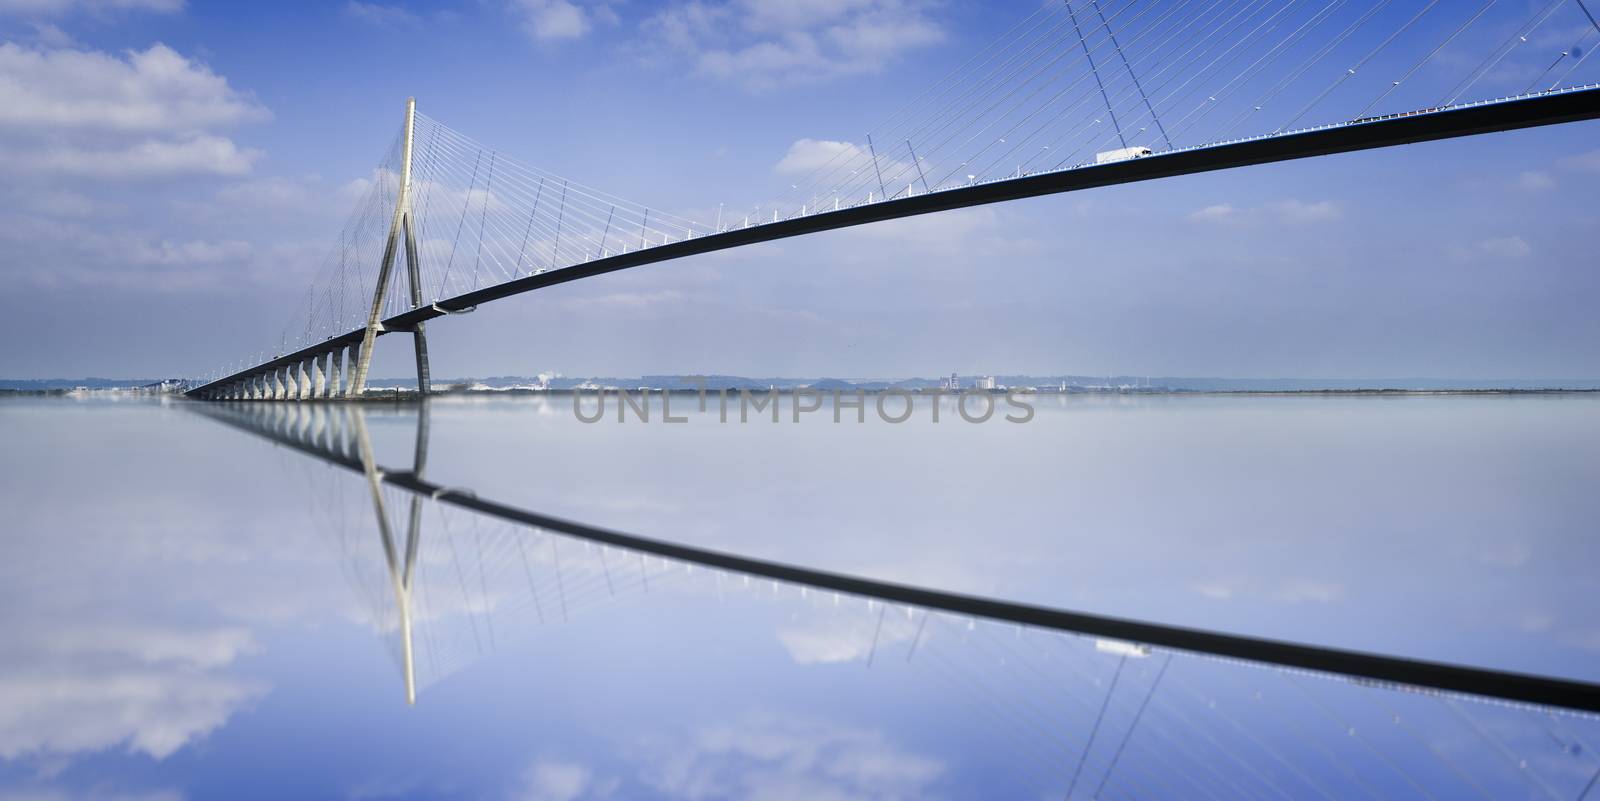 pillar of the bridge "Pont du Normandie" reflected in the Seine river at Le Havre, France